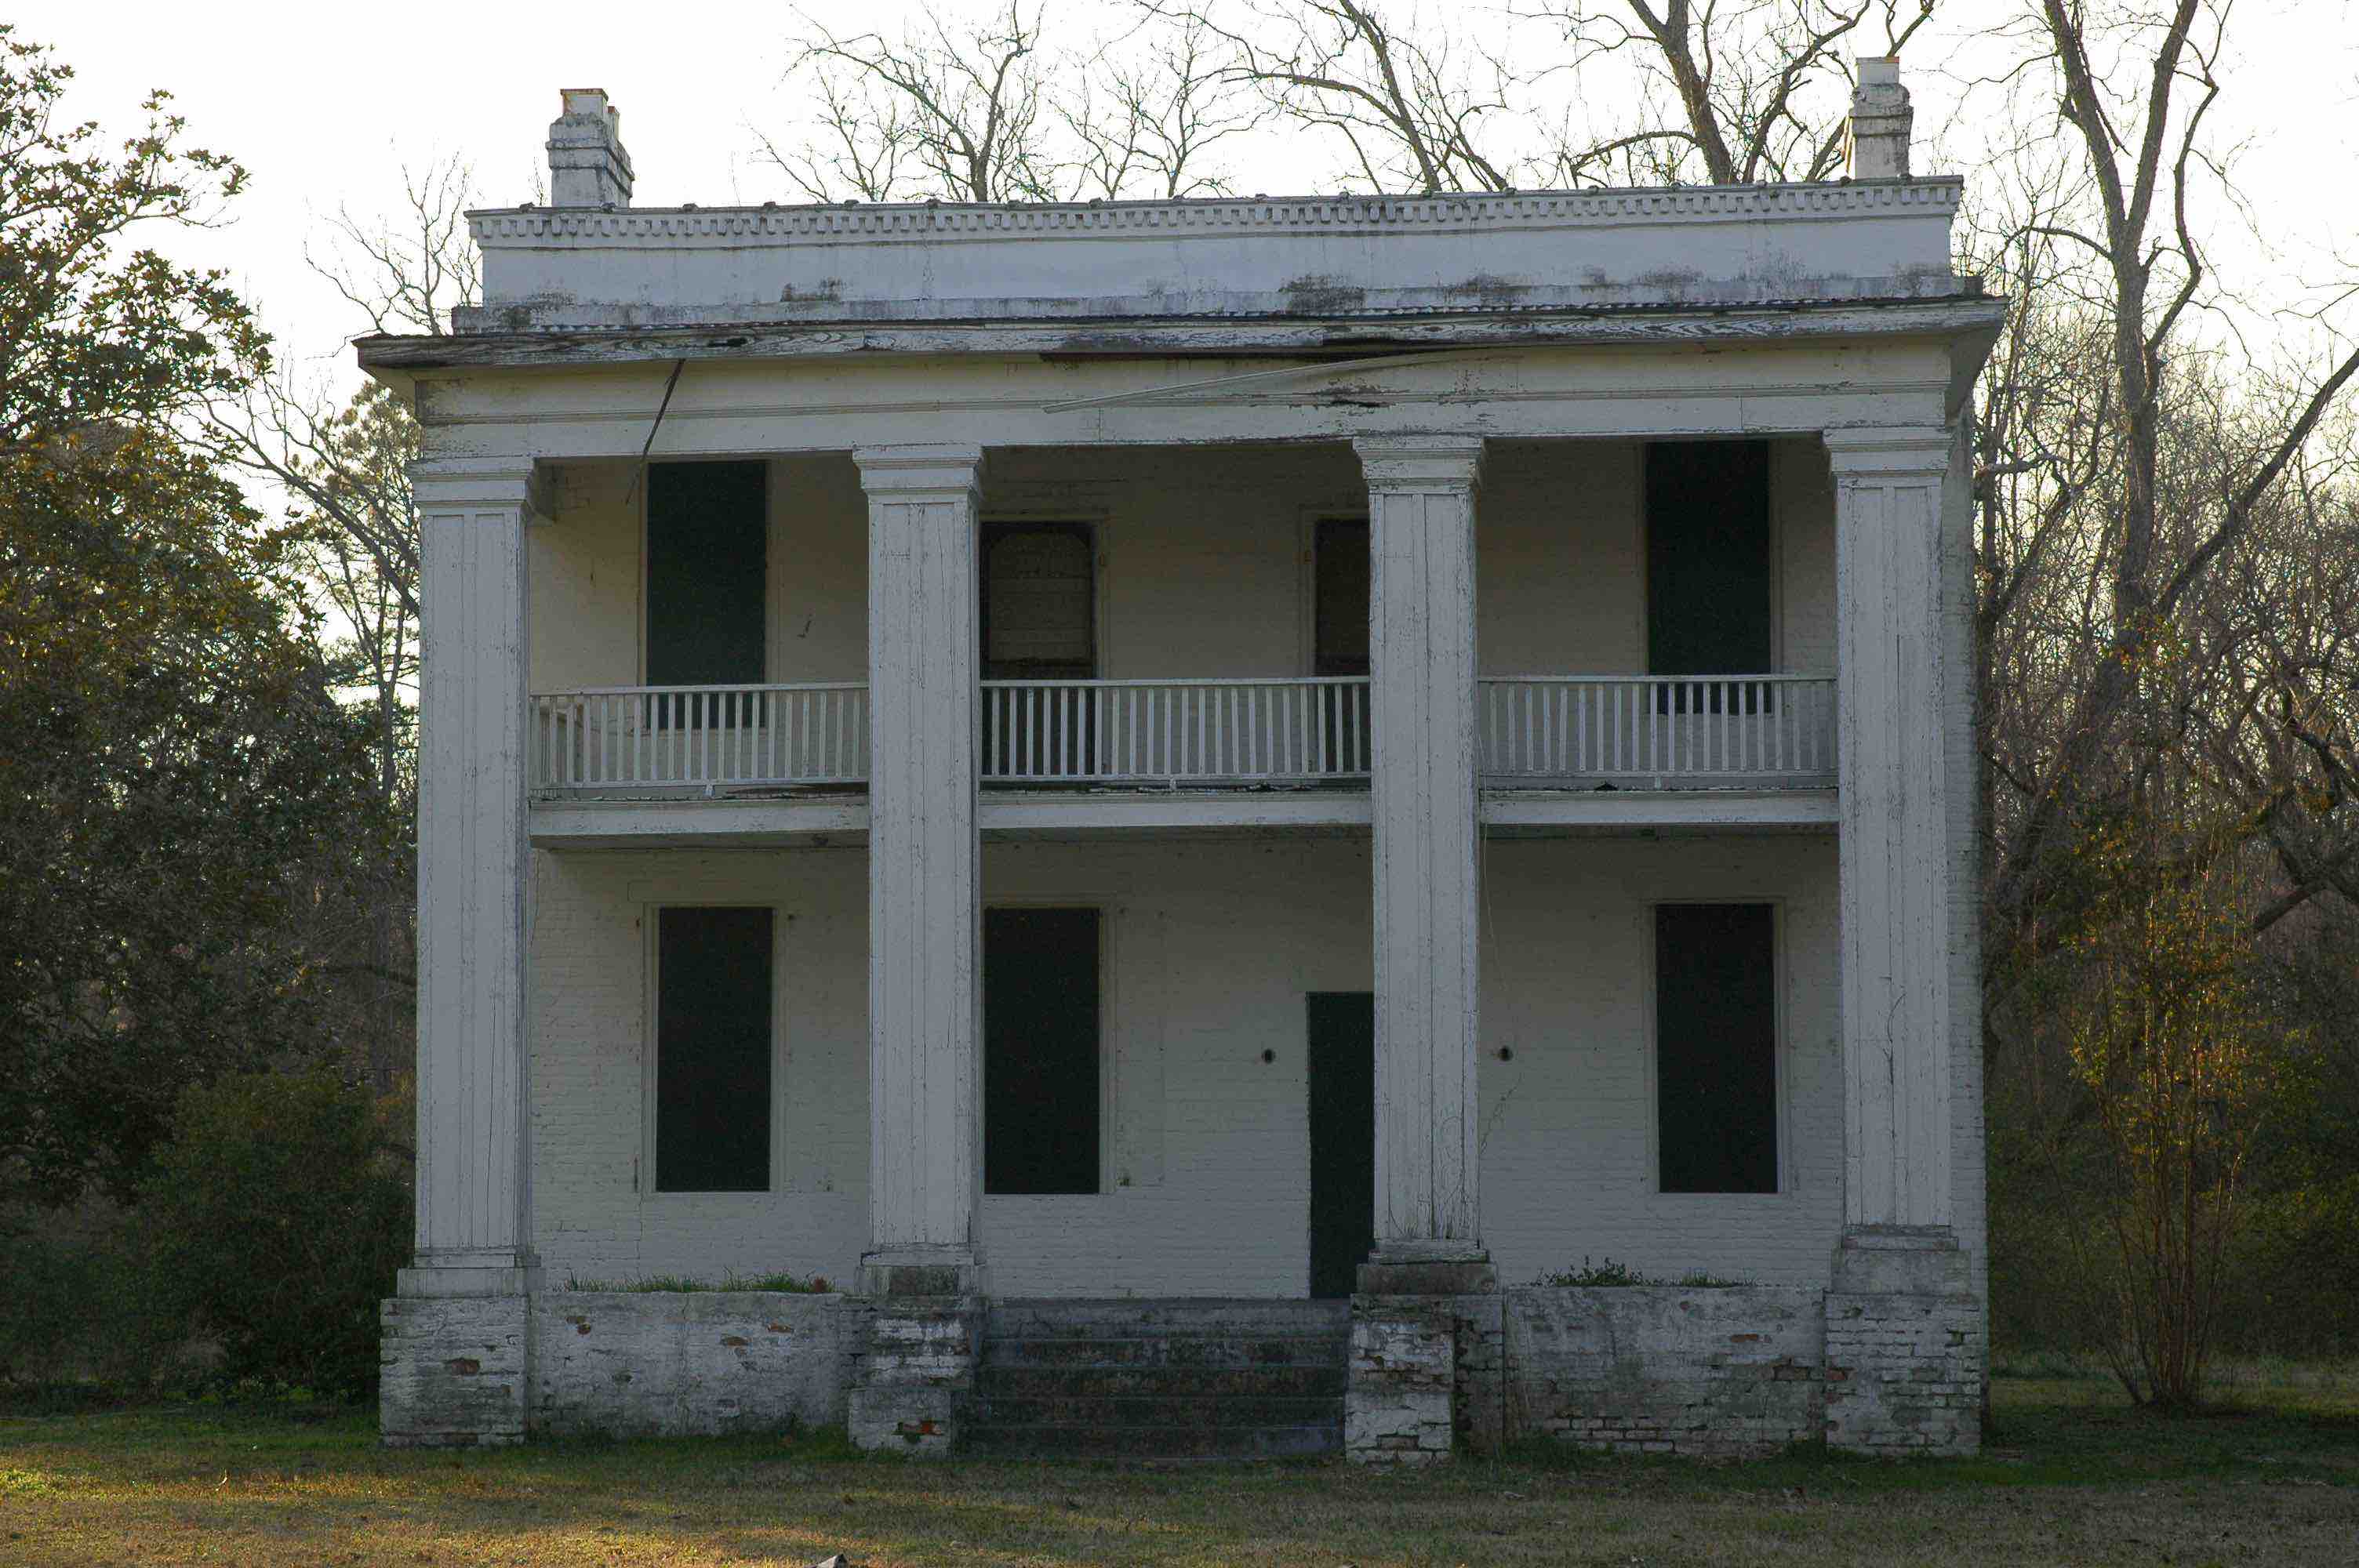 Visit this Antebellum Mansion in Old Cahawba, if you dare.